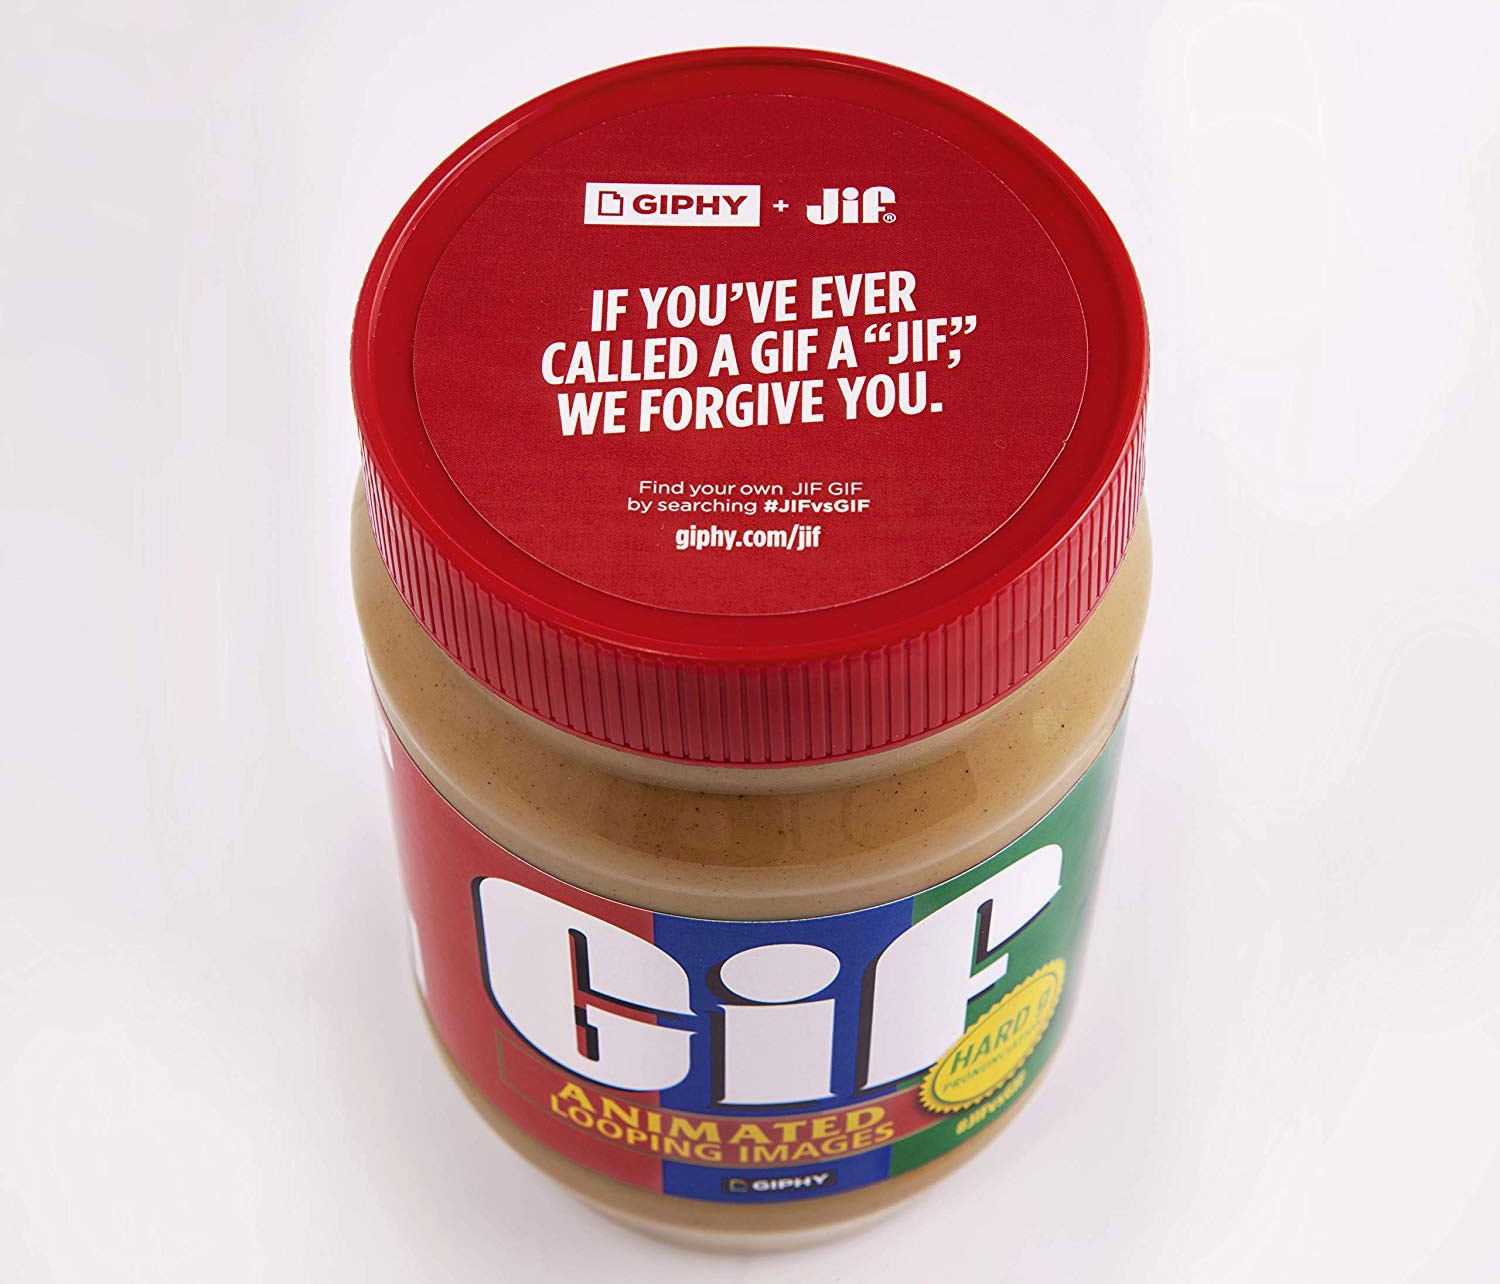 Gif and Jif on the same peanut butter